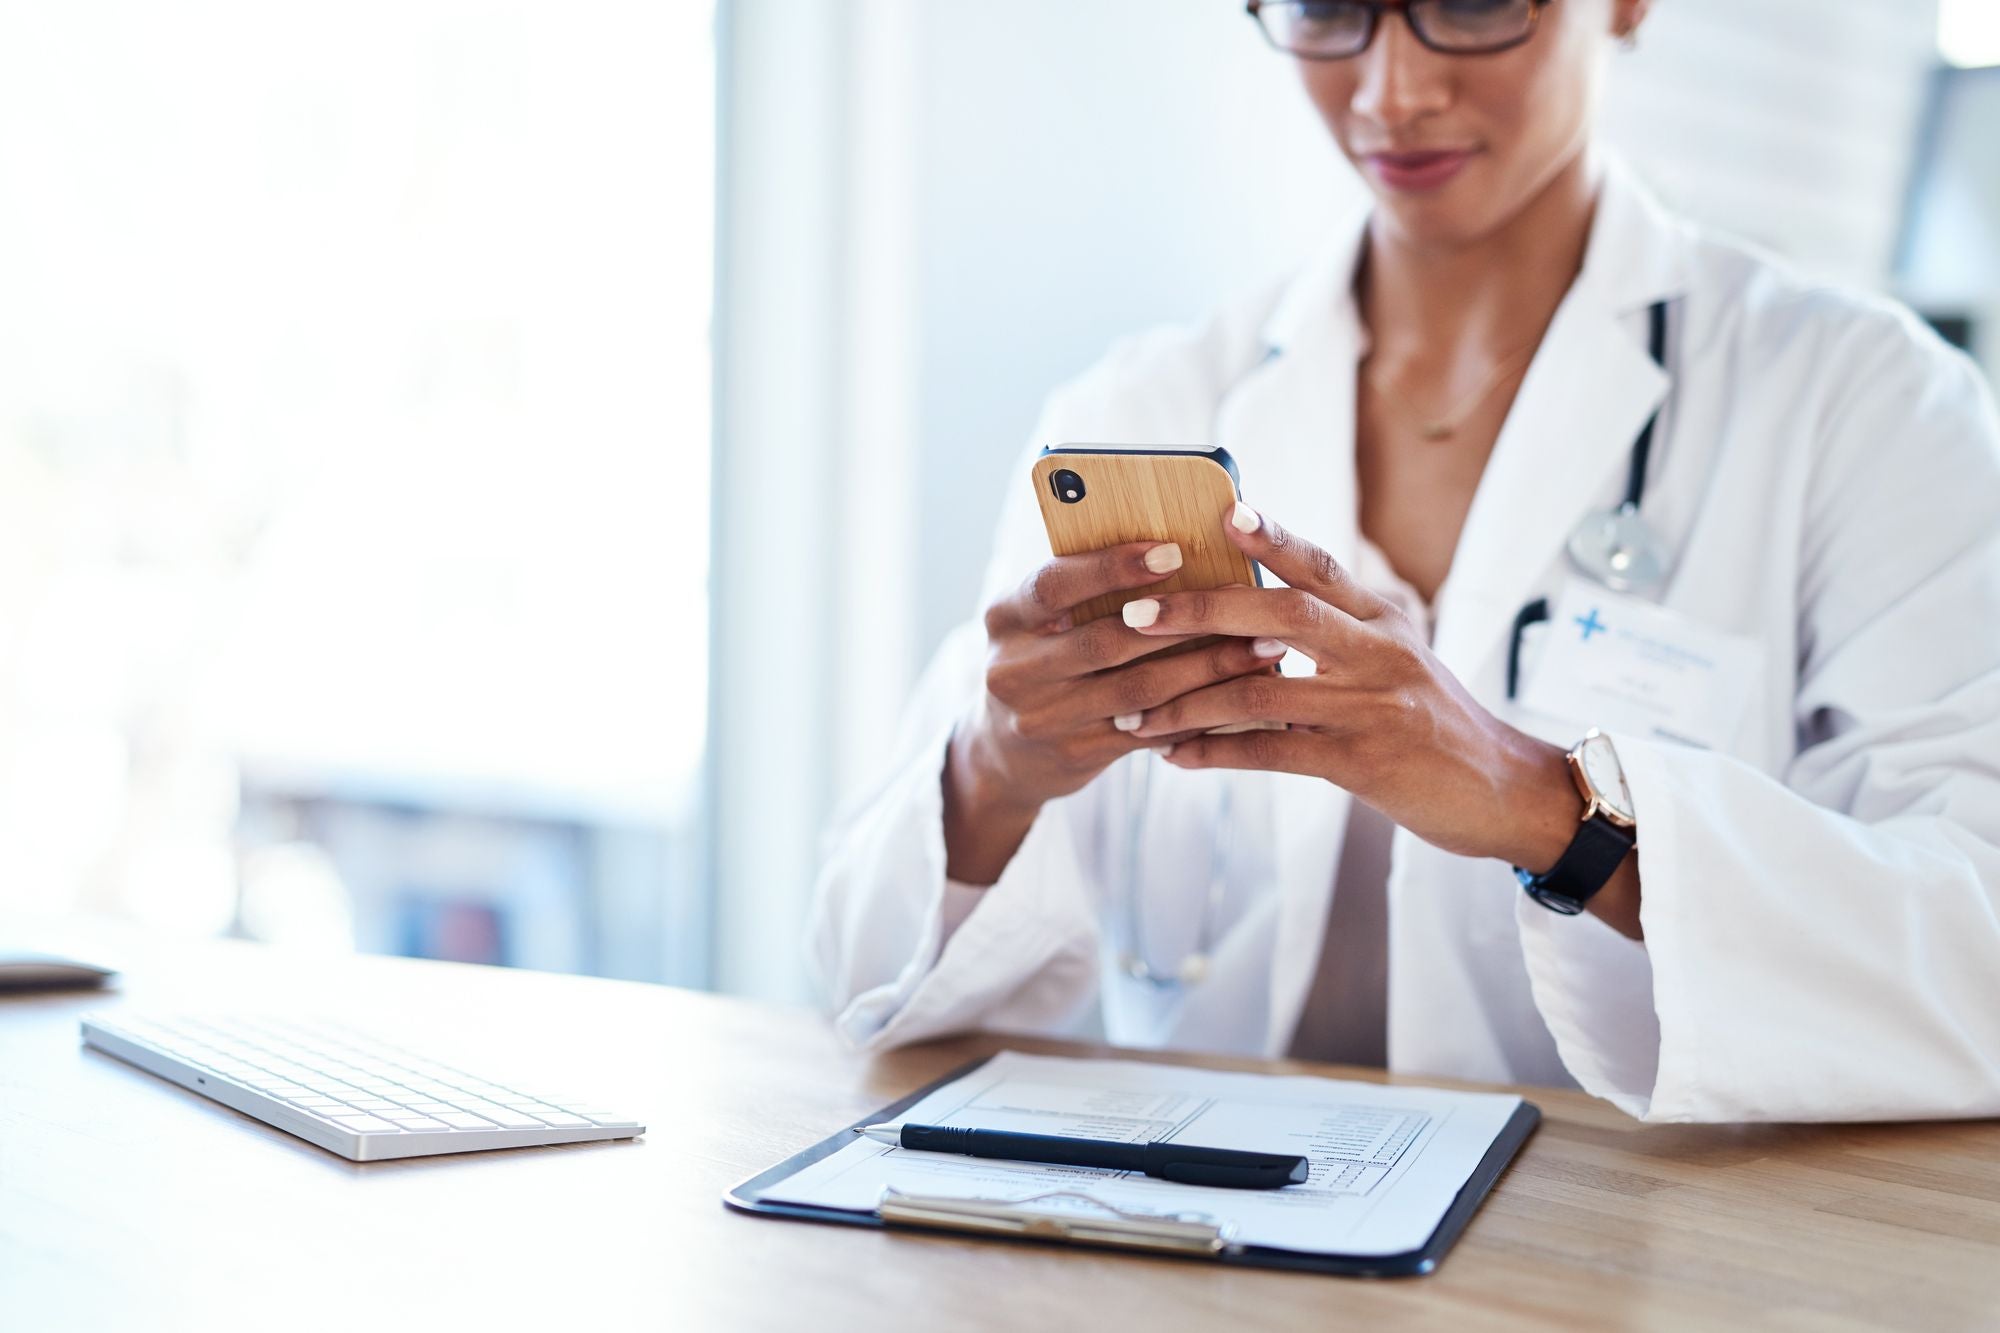 HIPAA-compliant How to Share Patient Lab Results via Text in a HIPAA Compliant Way